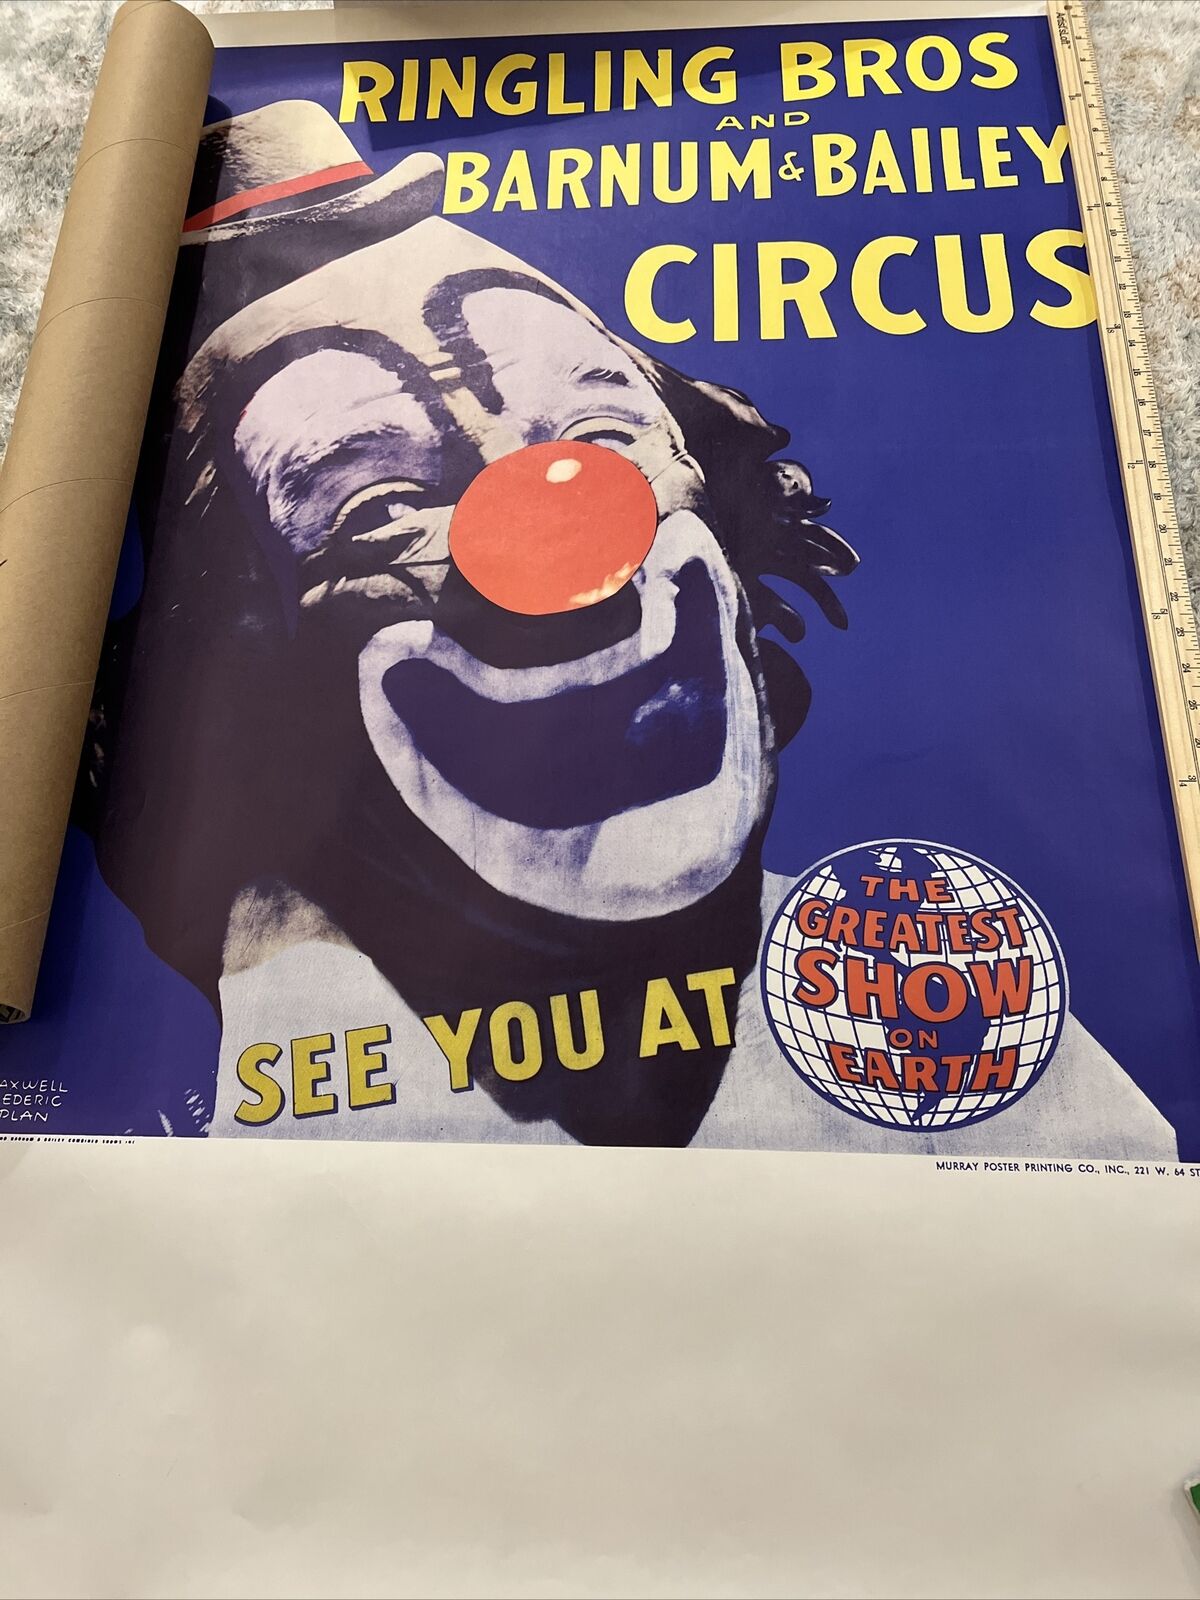 RINGLING BROTHERS CIRCUS POSTER LOU JACOBS CLOWN FEDERIC COPLAND VINTAGE 30x45